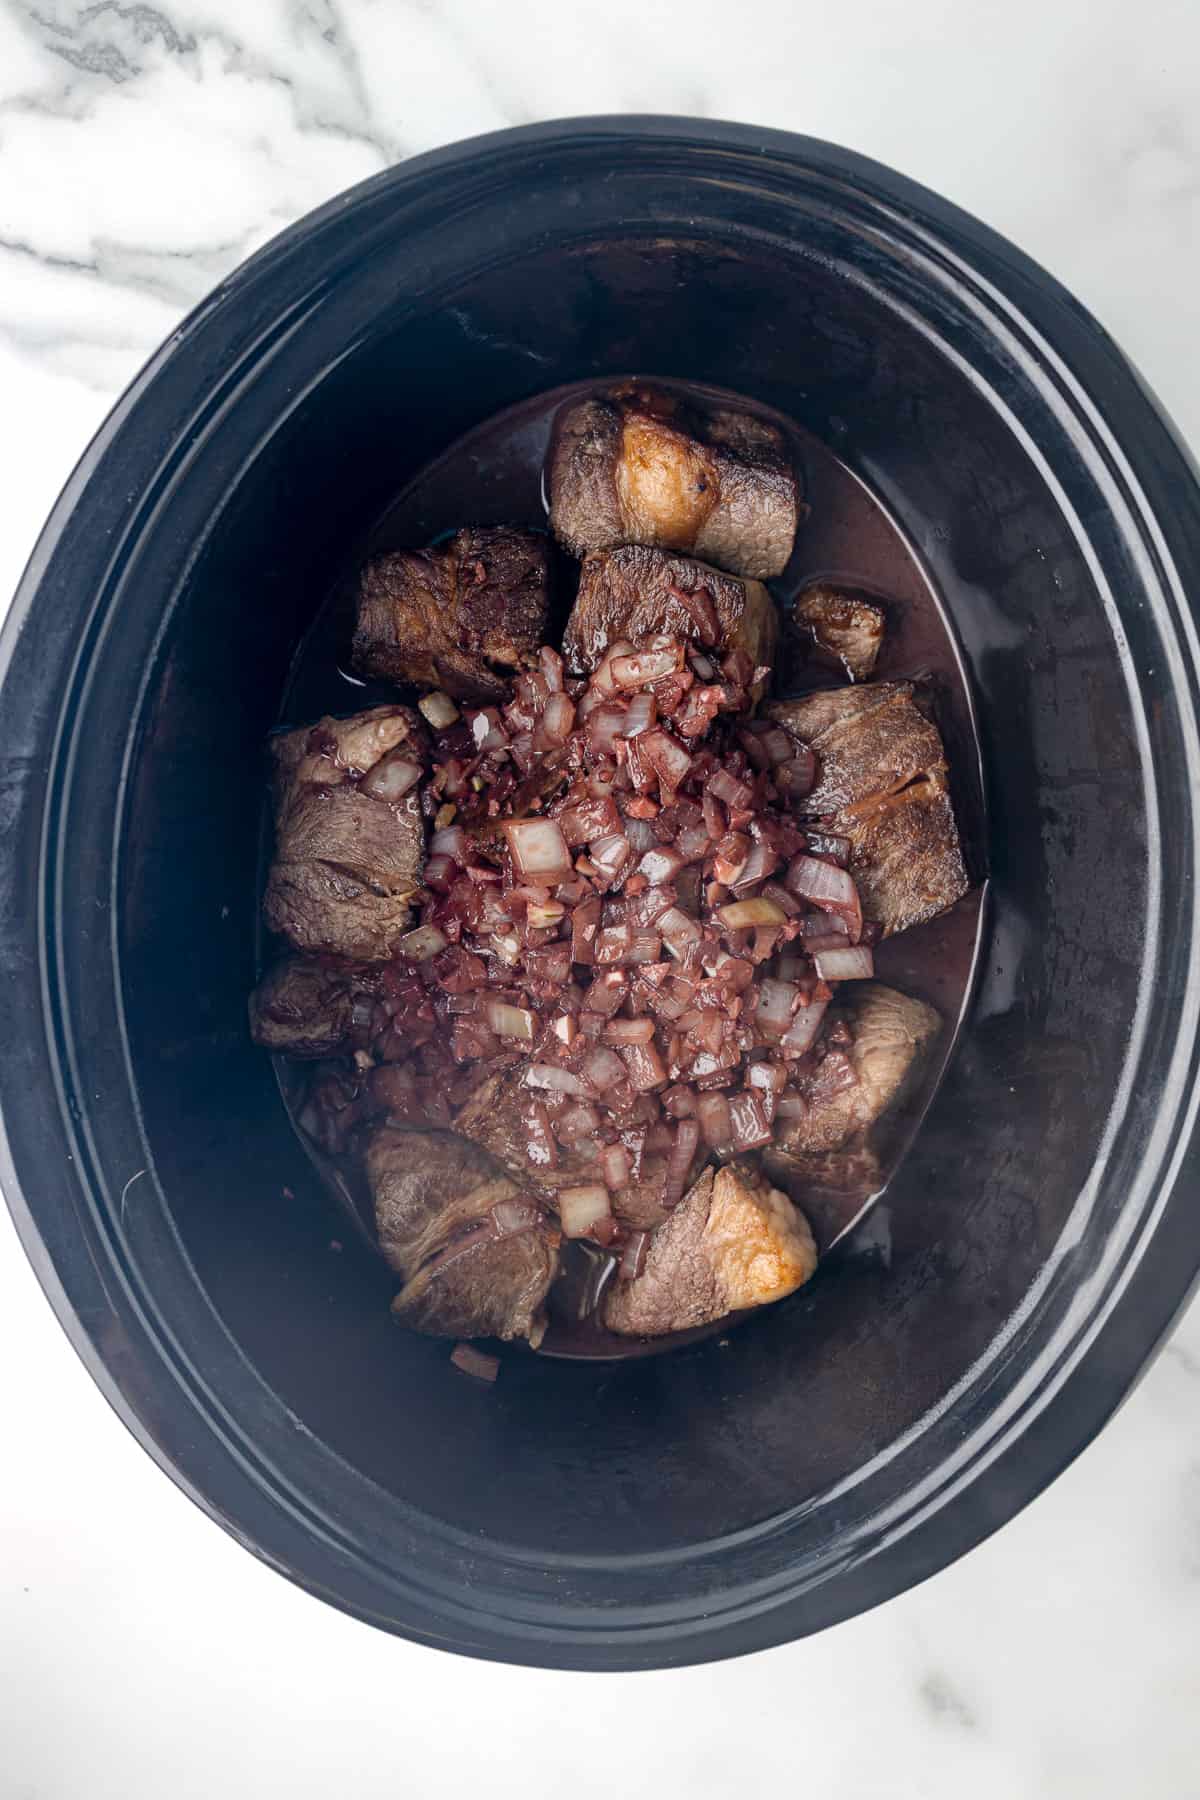 beef, onions, and spices in a crockpot.